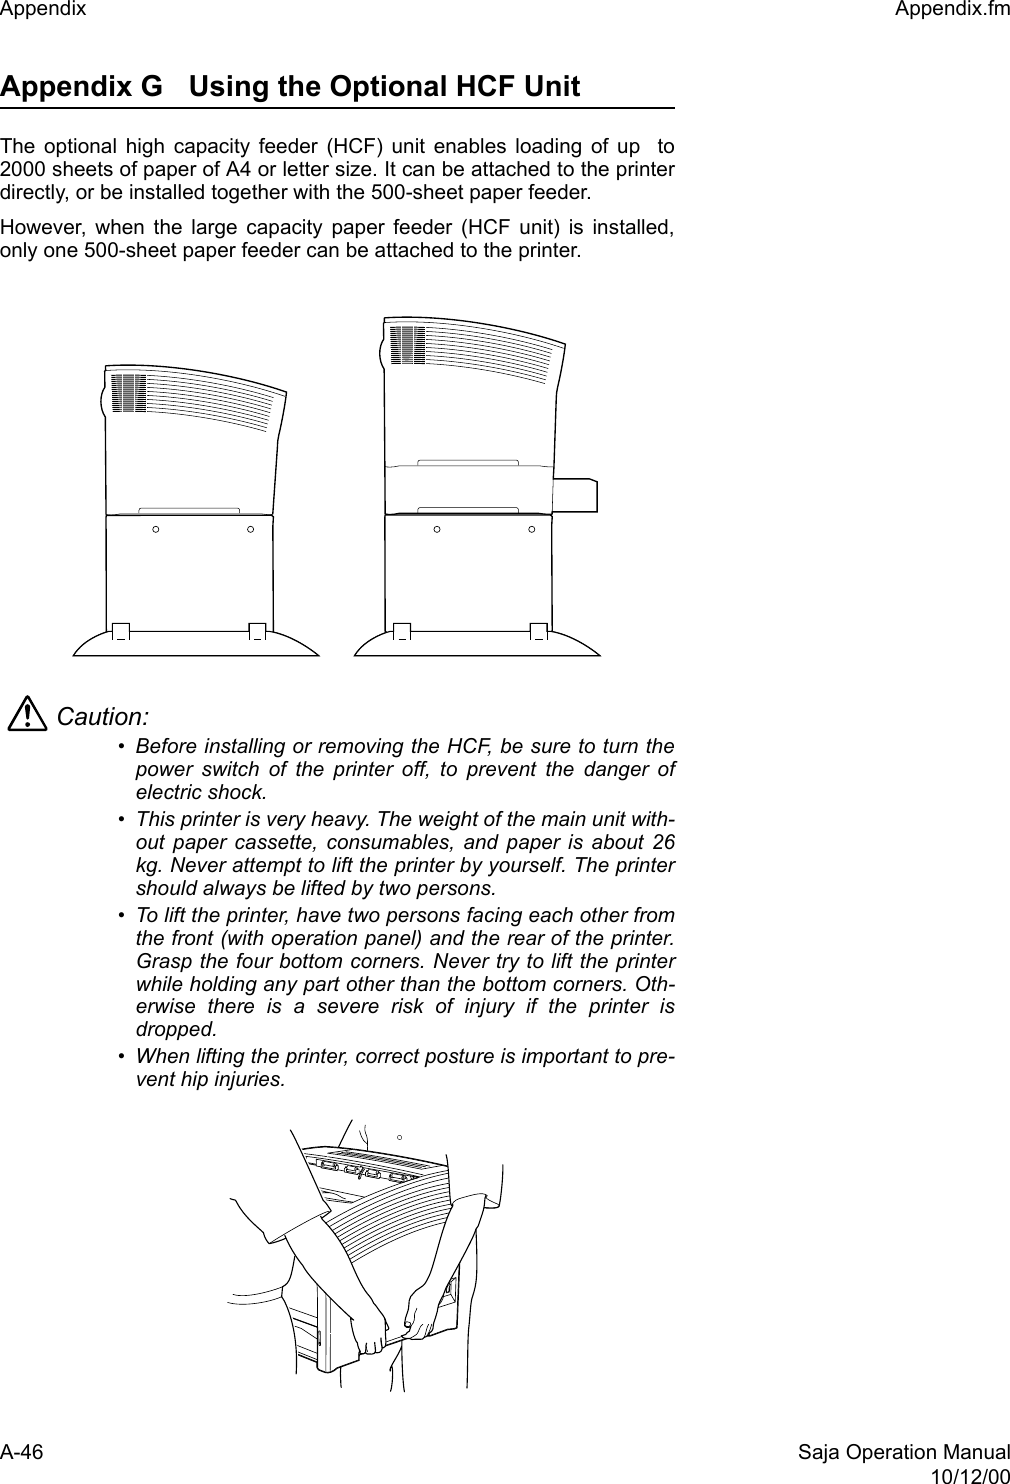 A-46 Saja Operation Manual10/12/00Appendix  Appendix.fmAppendix G Using the Optional HCF Unit The optional high capacity feeder (HCF) unit enables loading of up  to2000 sheets of paper of A4 or letter size. It can be attached to the printerdirectly, or be installed together with the 500-sheet paper feeder. However, when the large capacity paper feeder (HCF unit) is installed,only one 500-sheet paper feeder can be attached to the printer.Caution: • Before installing or removing the HCF, be sure to turn thepower switch of the printer off, to prevent the danger ofelectric shock. • This printer is very heavy. The weight of the main unit with-out paper cassette, consumables, and paper is about 26kg. Never attempt to lift the printer by yourself. The printershould always be lifted by two persons. • To lift the printer, have two persons facing each other fromthe front (with operation panel) and the rear of the printer.Grasp the four bottom corners. Never try to lift the printerwhile holding any part other than the bottom corners. Oth-erwise there is a severe risk of injury if the printer isdropped. • When lifting the printer, correct posture is important to pre-vent hip injuries. 